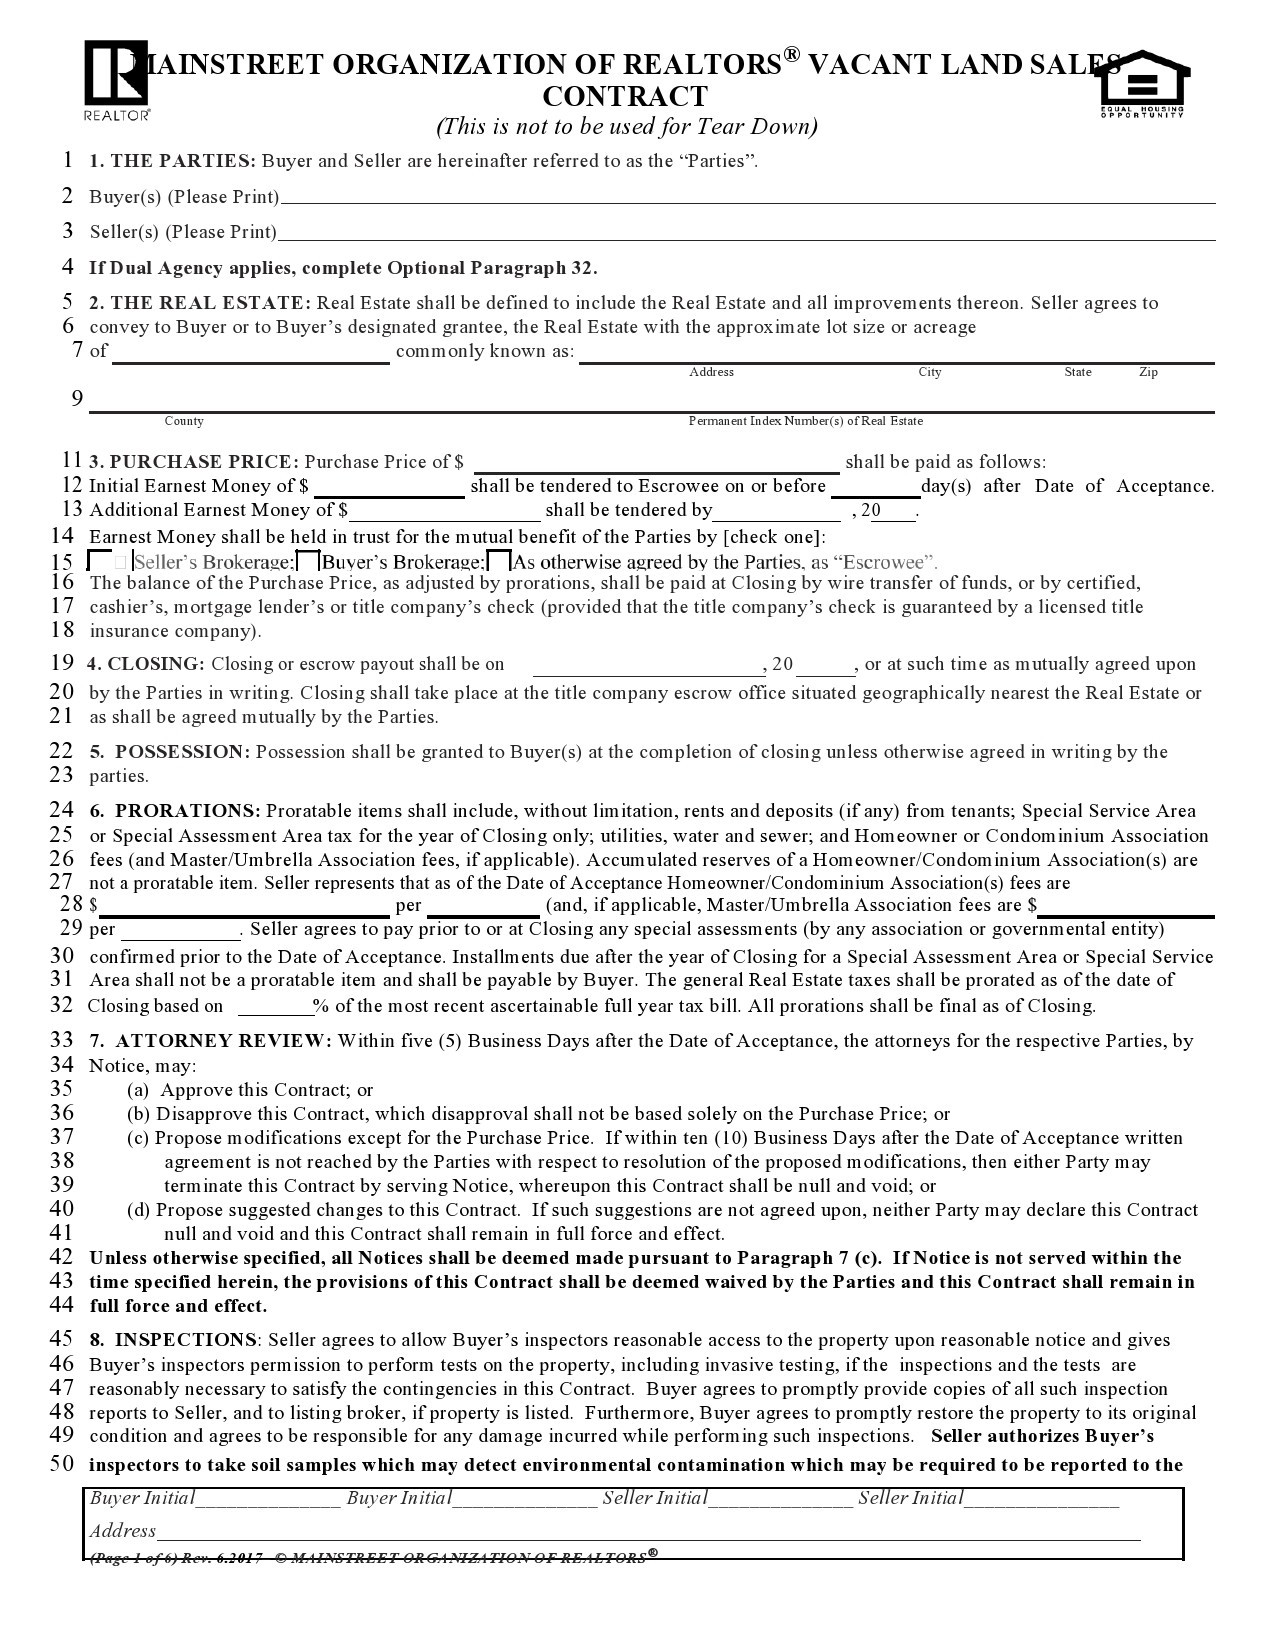 Free land contract form 24